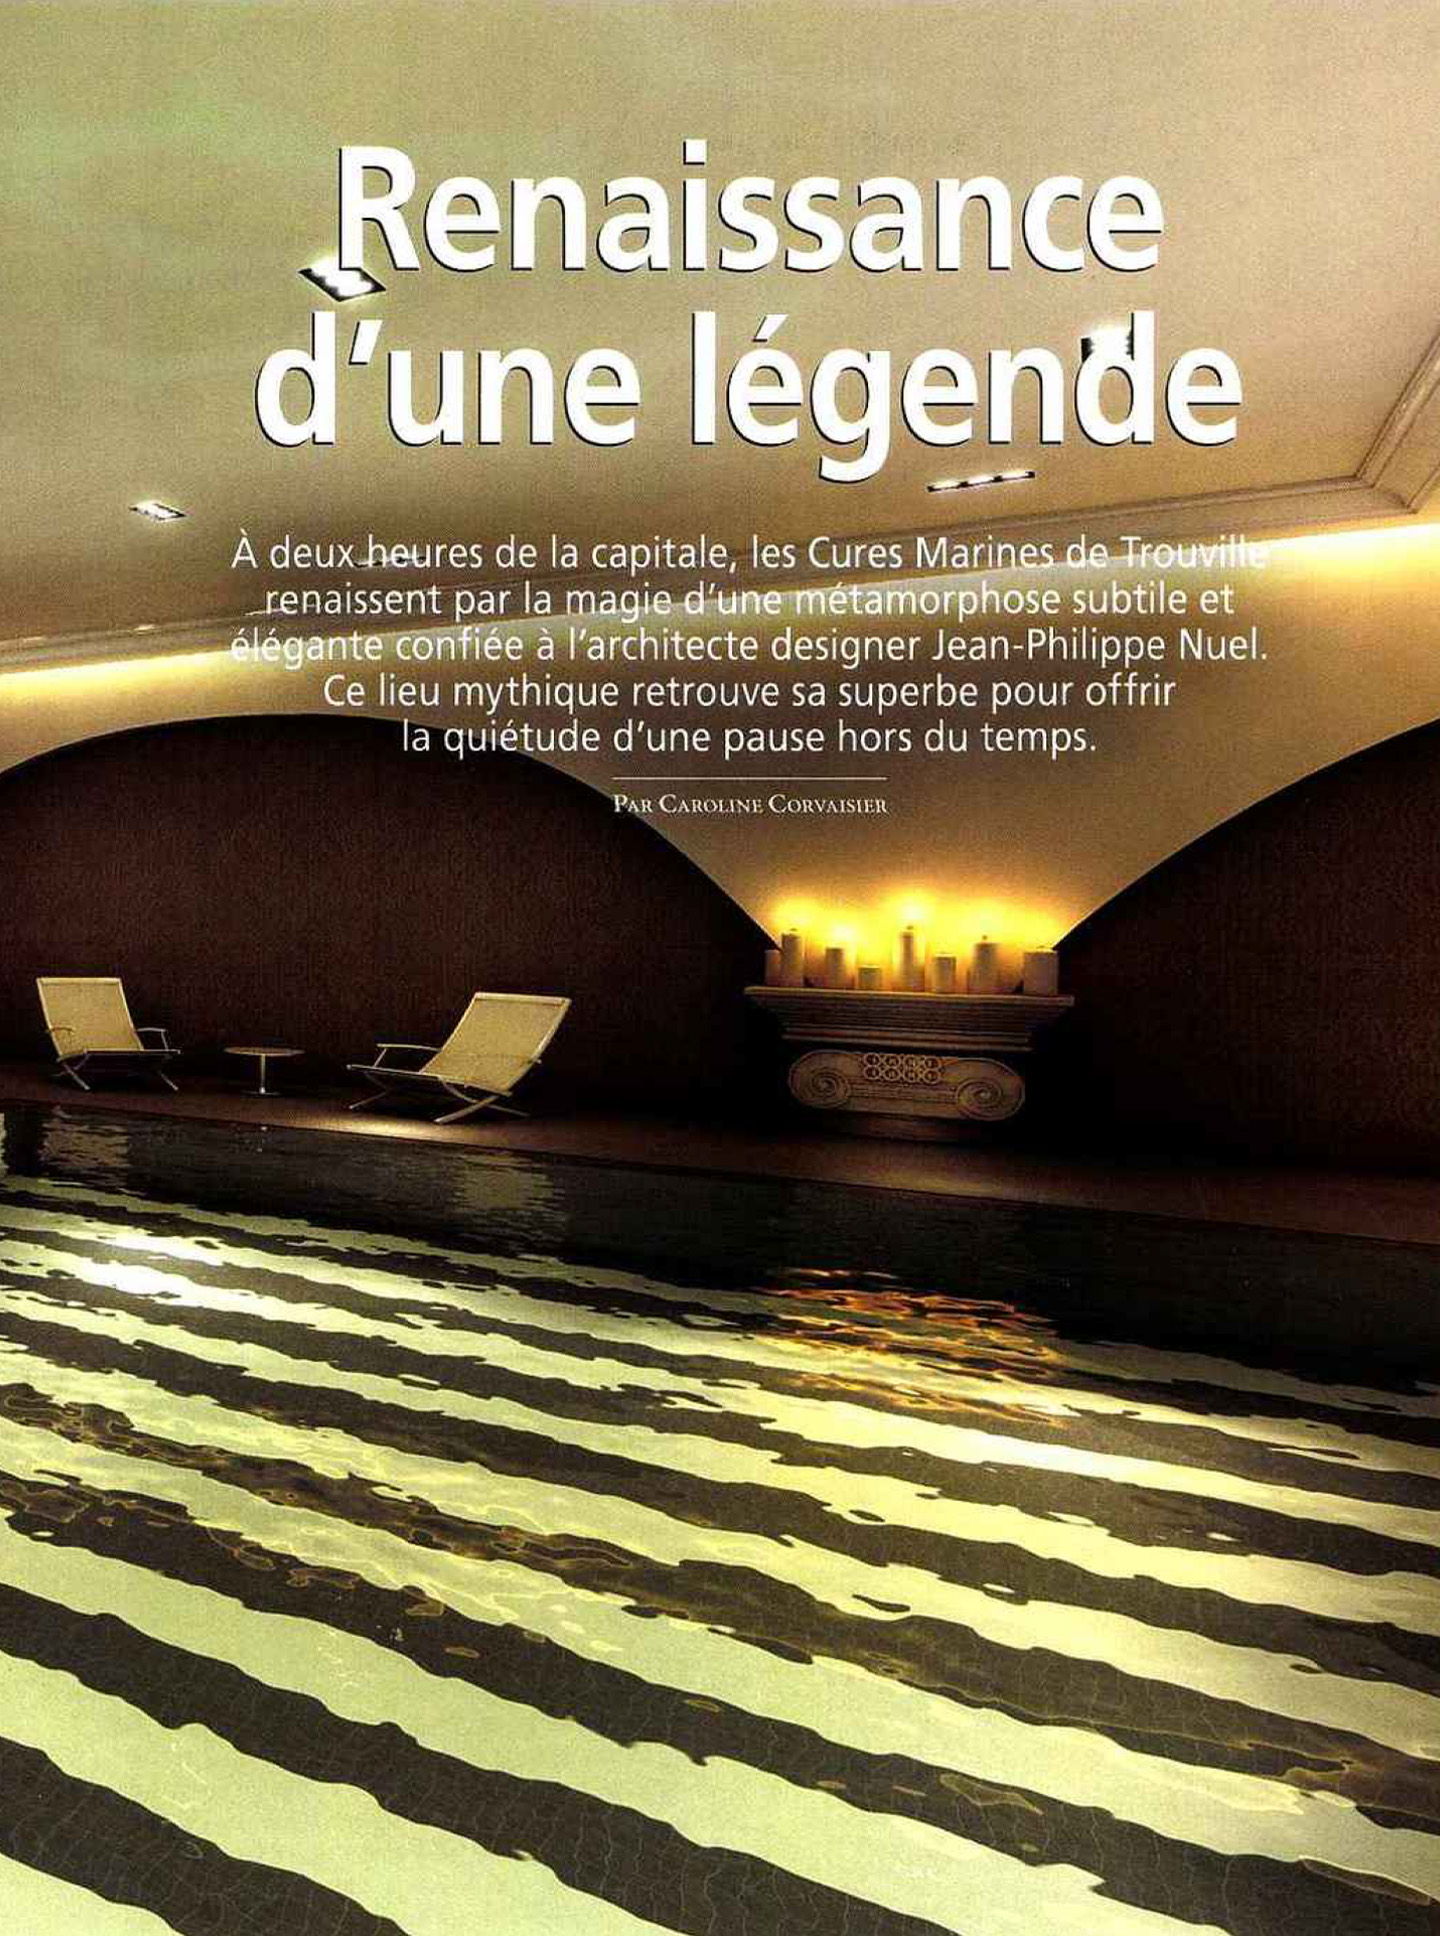 article on the marine cures of trouville in the magazine hotel & lodge, luxury hotel and spa by the architecture studio jean-philippe nuel